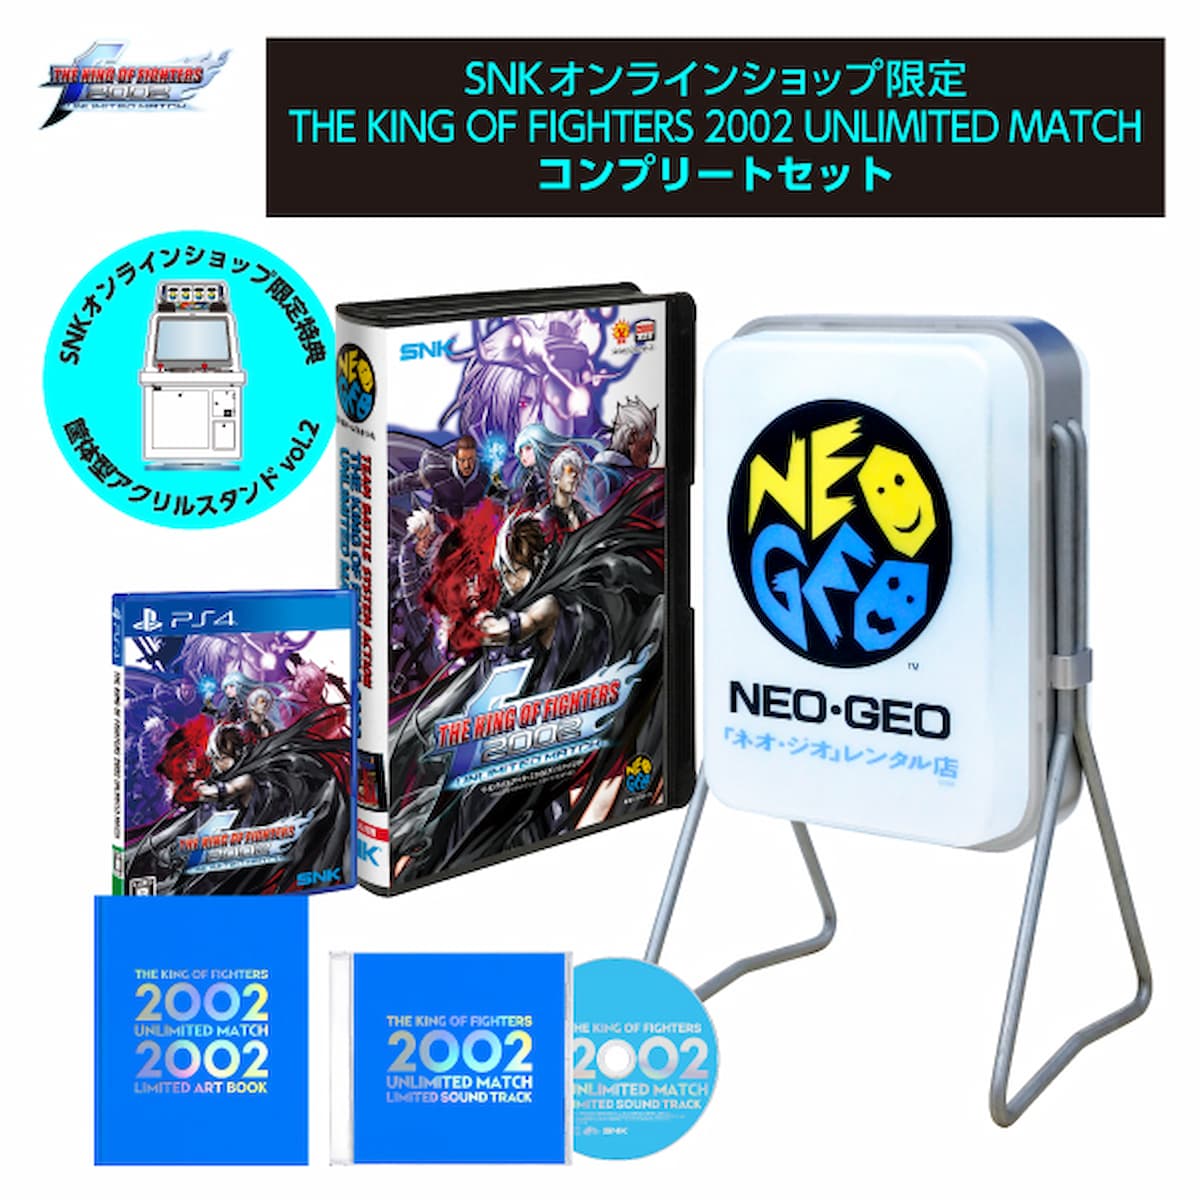 THE KING OF FIGHTERS 2002 UNLIMITED MATCH コンプリートセット - PS4